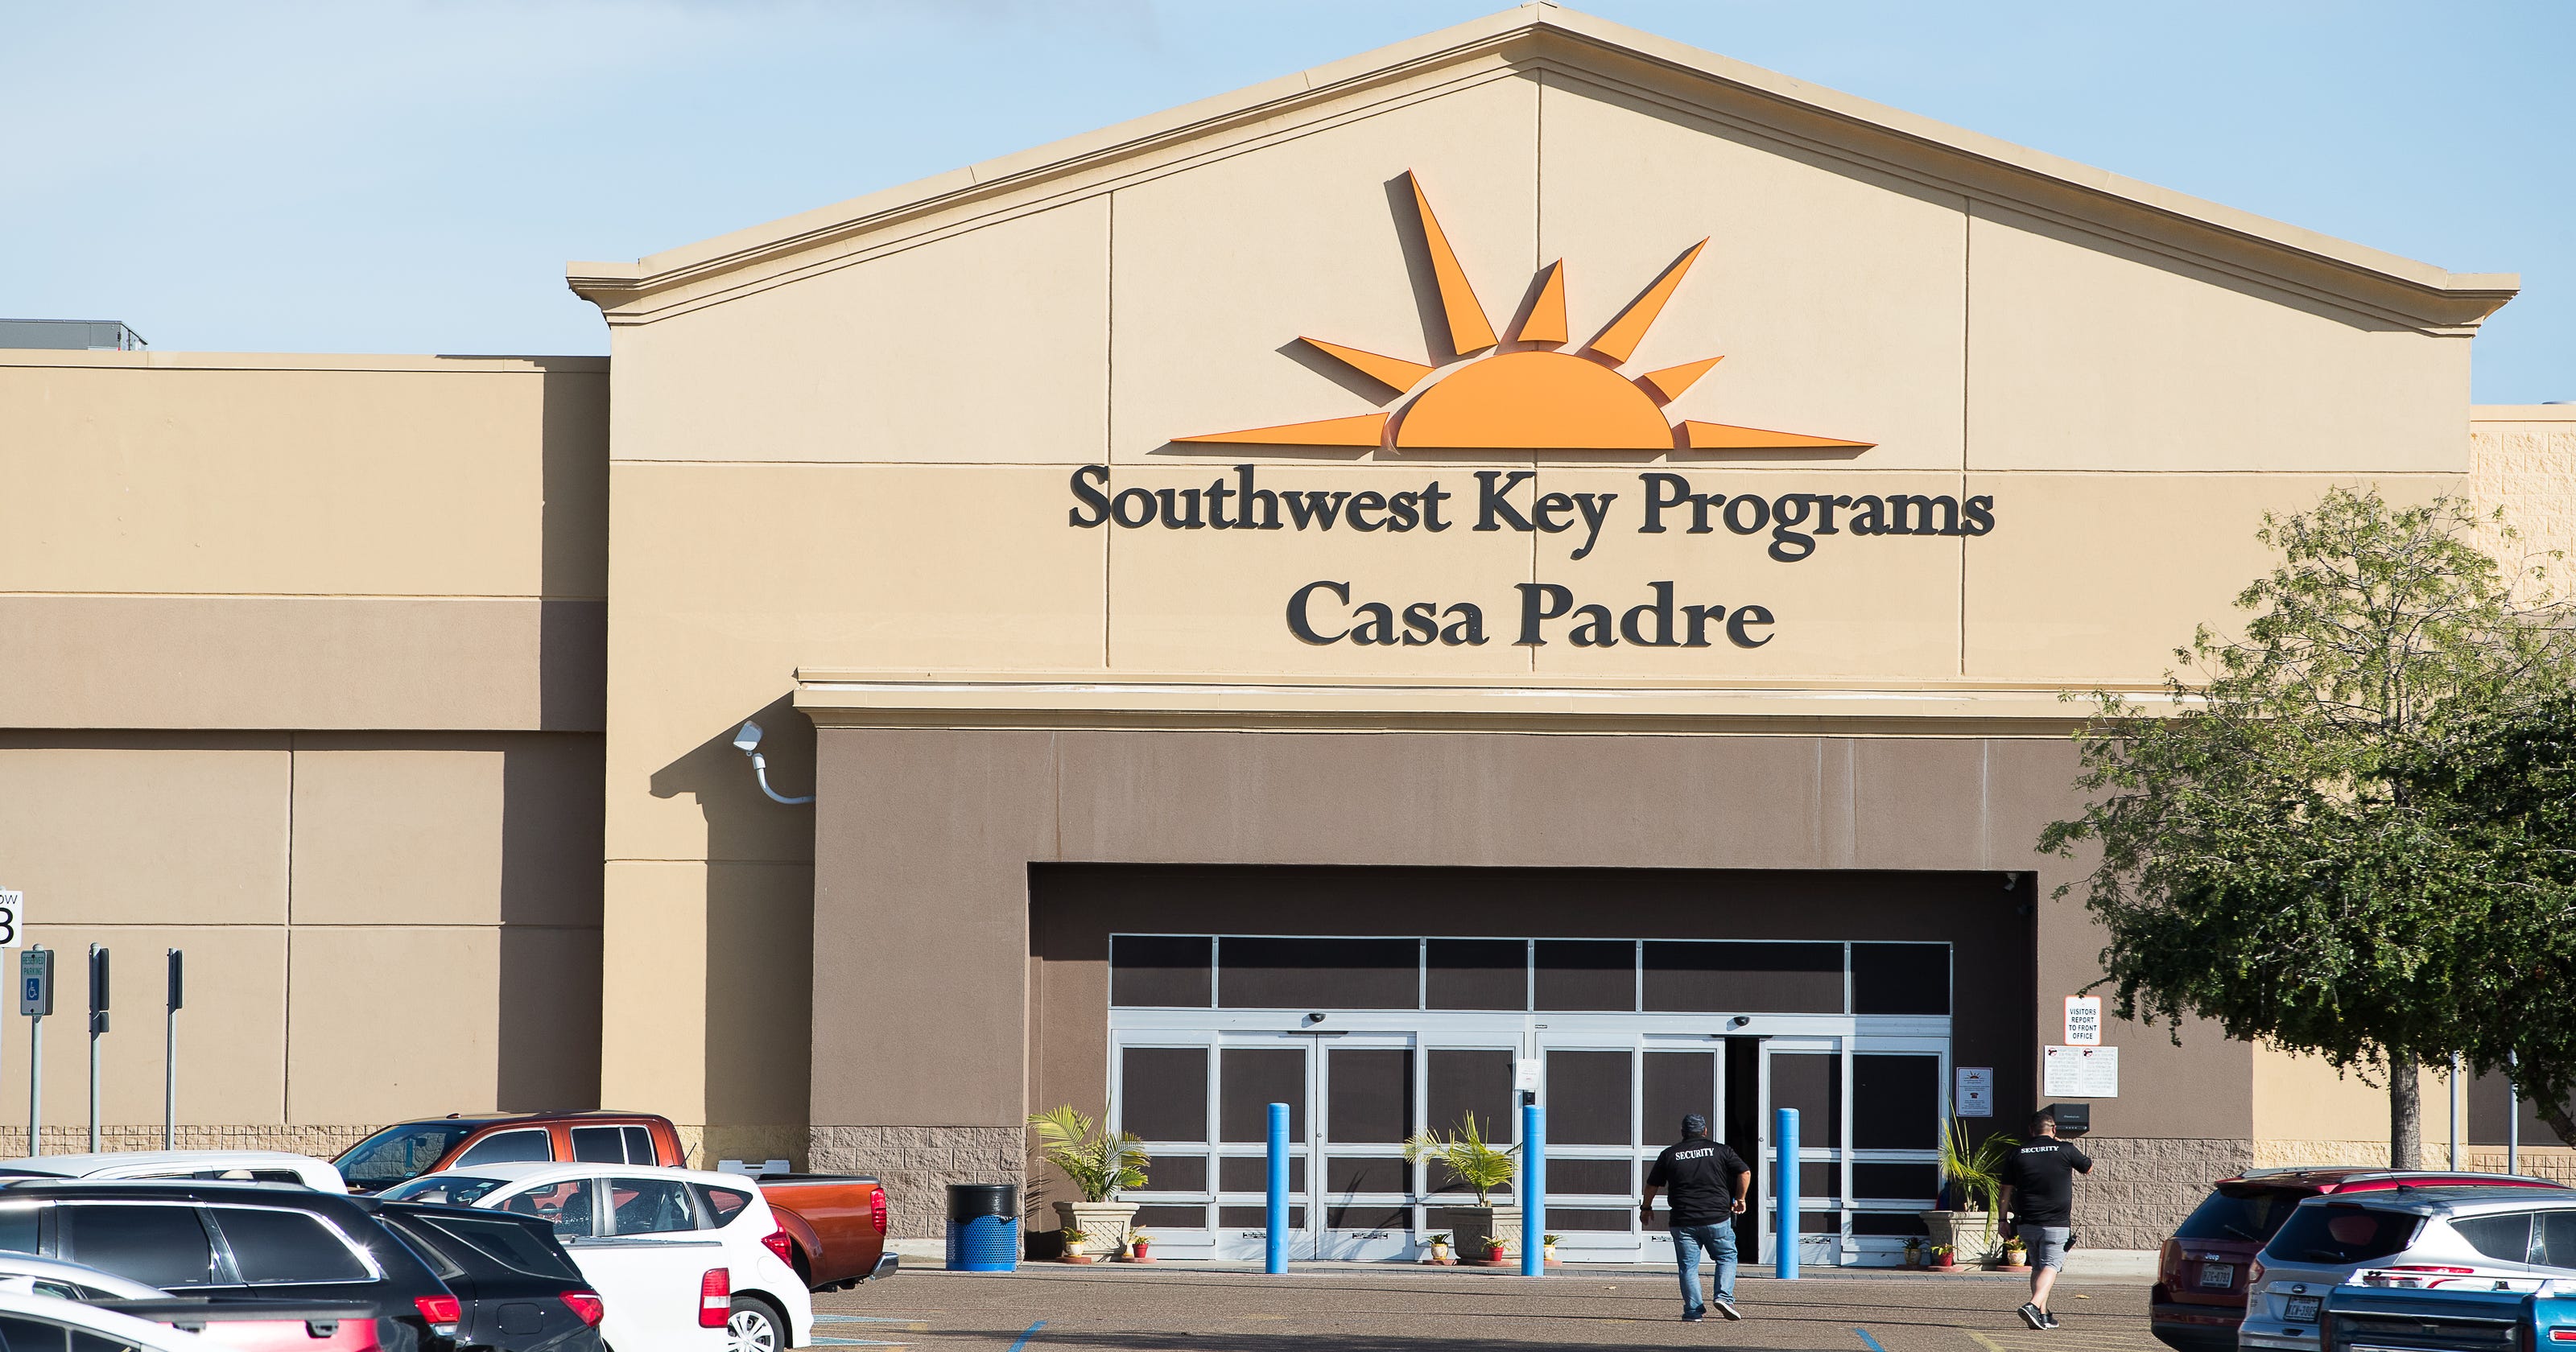 Charter School Has Ties To Network Of Shelters For Immigrant Children